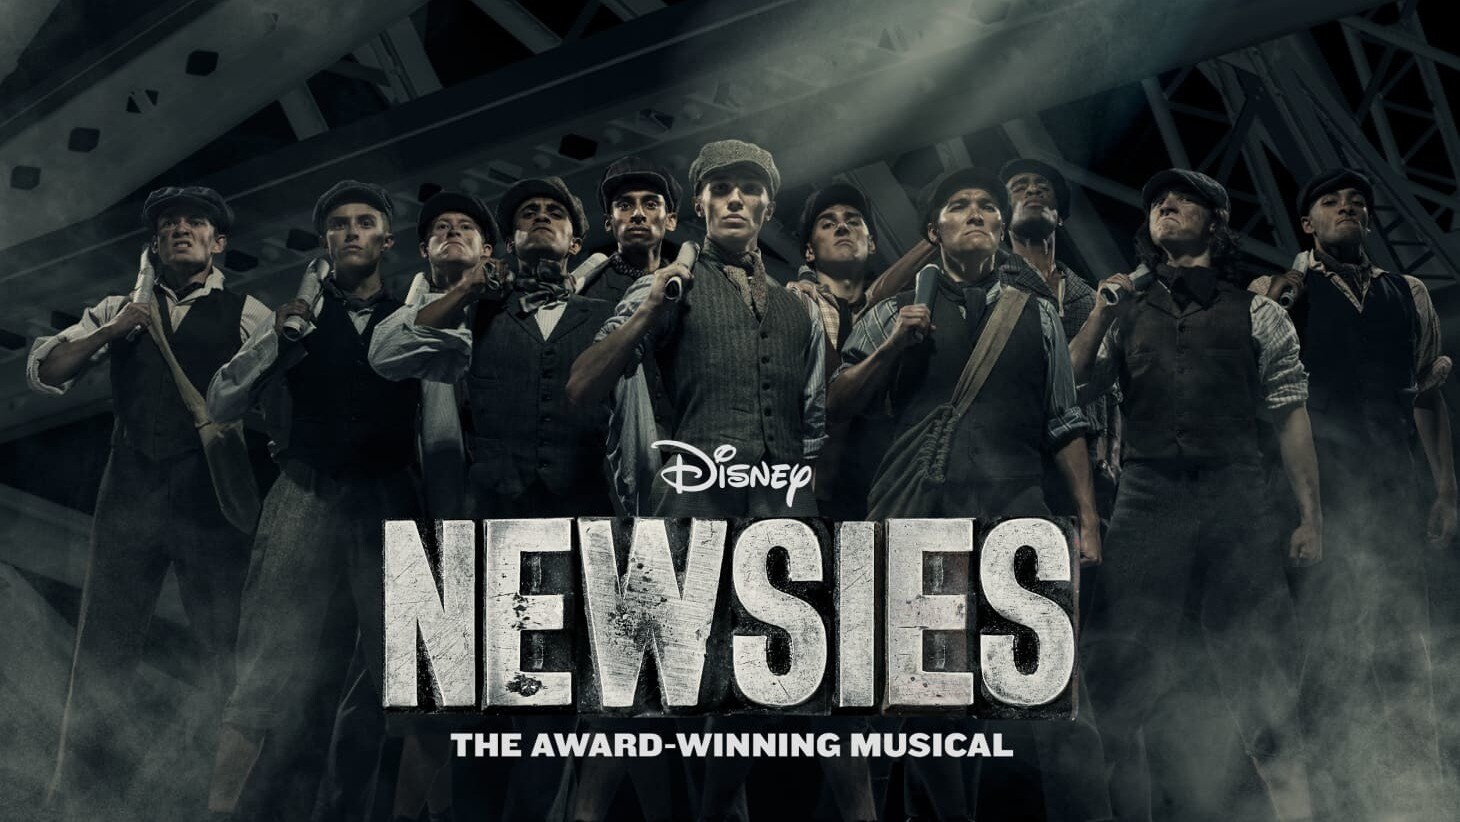 Newsies director Matt Cole: ‘Our production will make people feel part of the story’